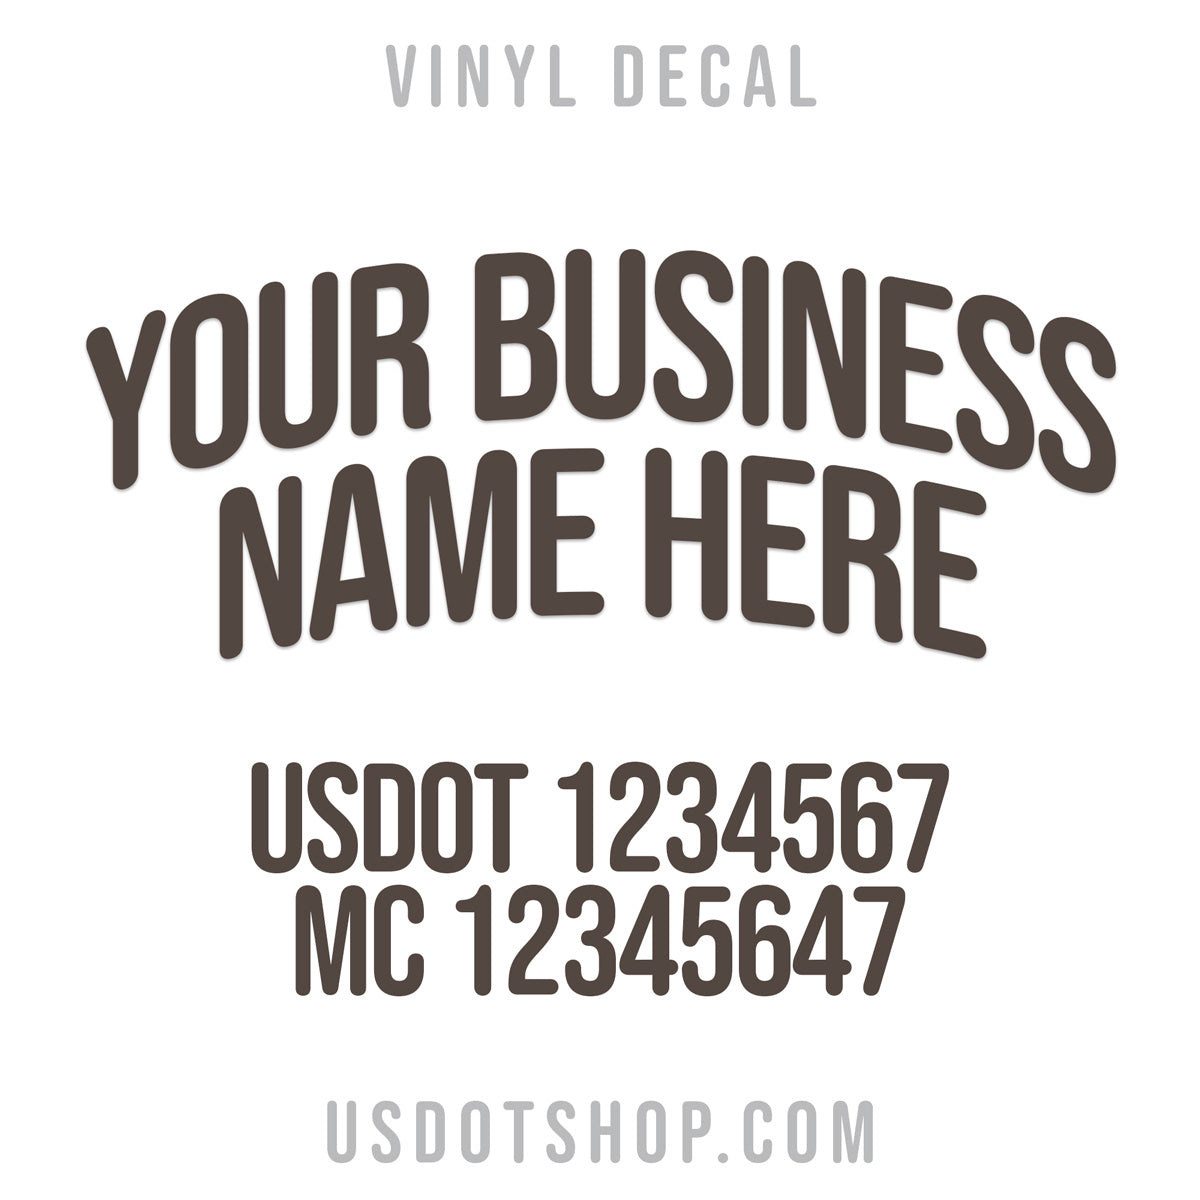 company name decal with usdot, mc numbers